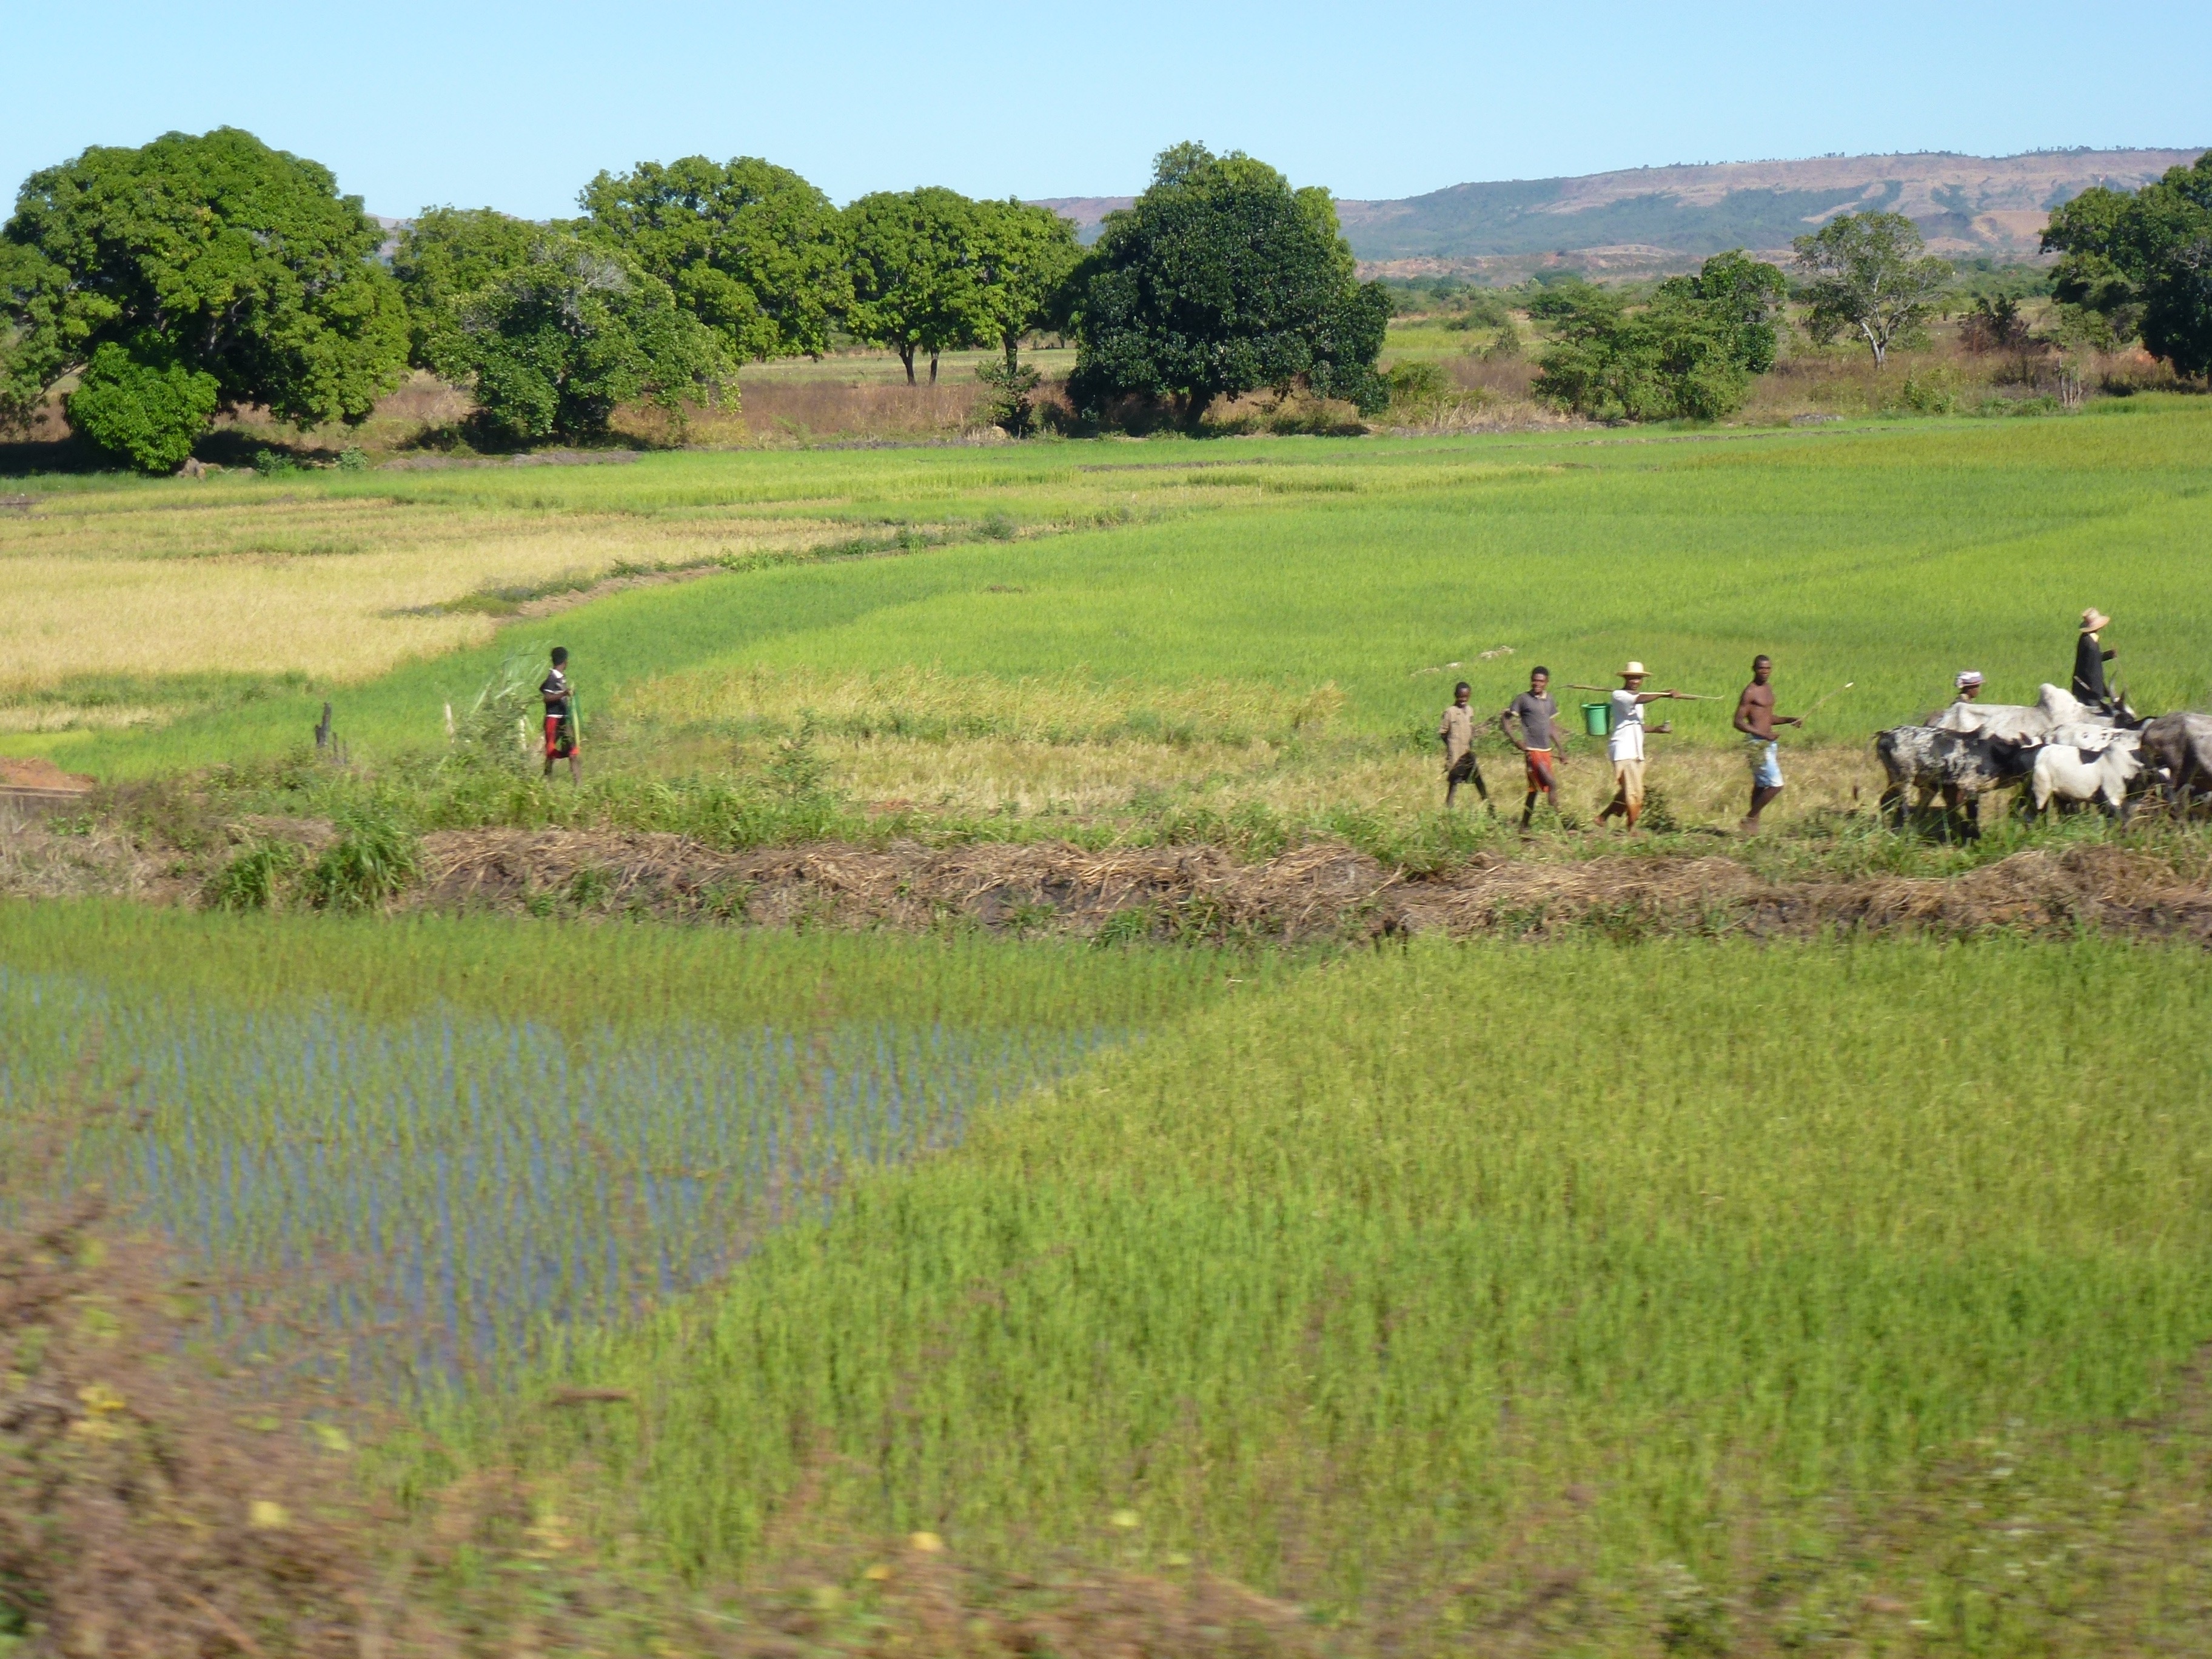 Crop remains point to surprising early colonisers of Madagascar